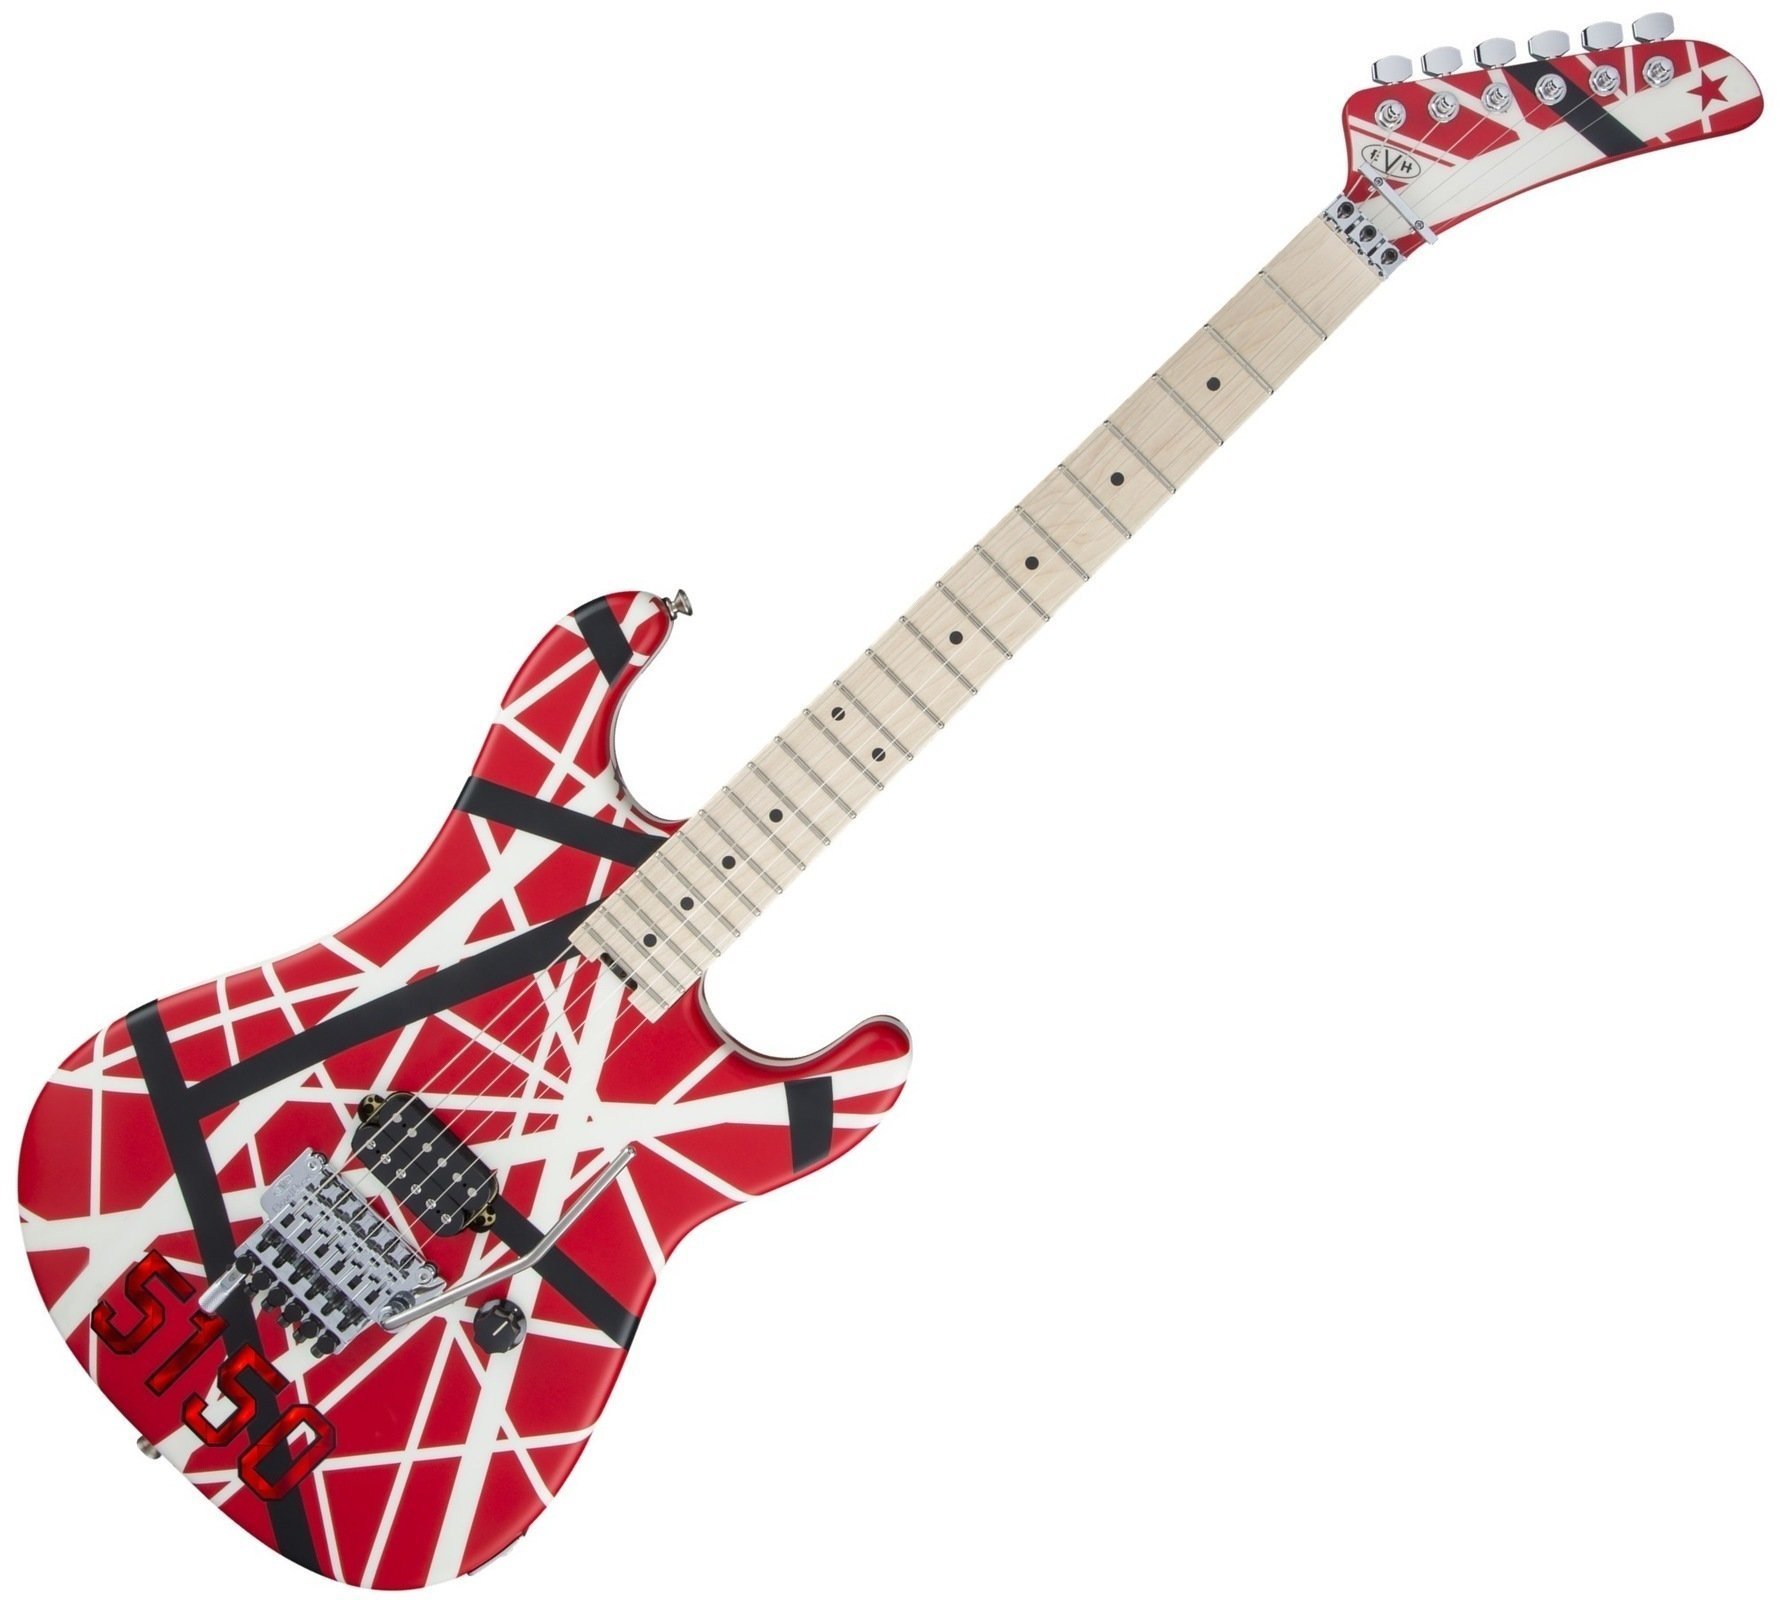 EVH Striped Series 5150 MN Red Black and White Stripes